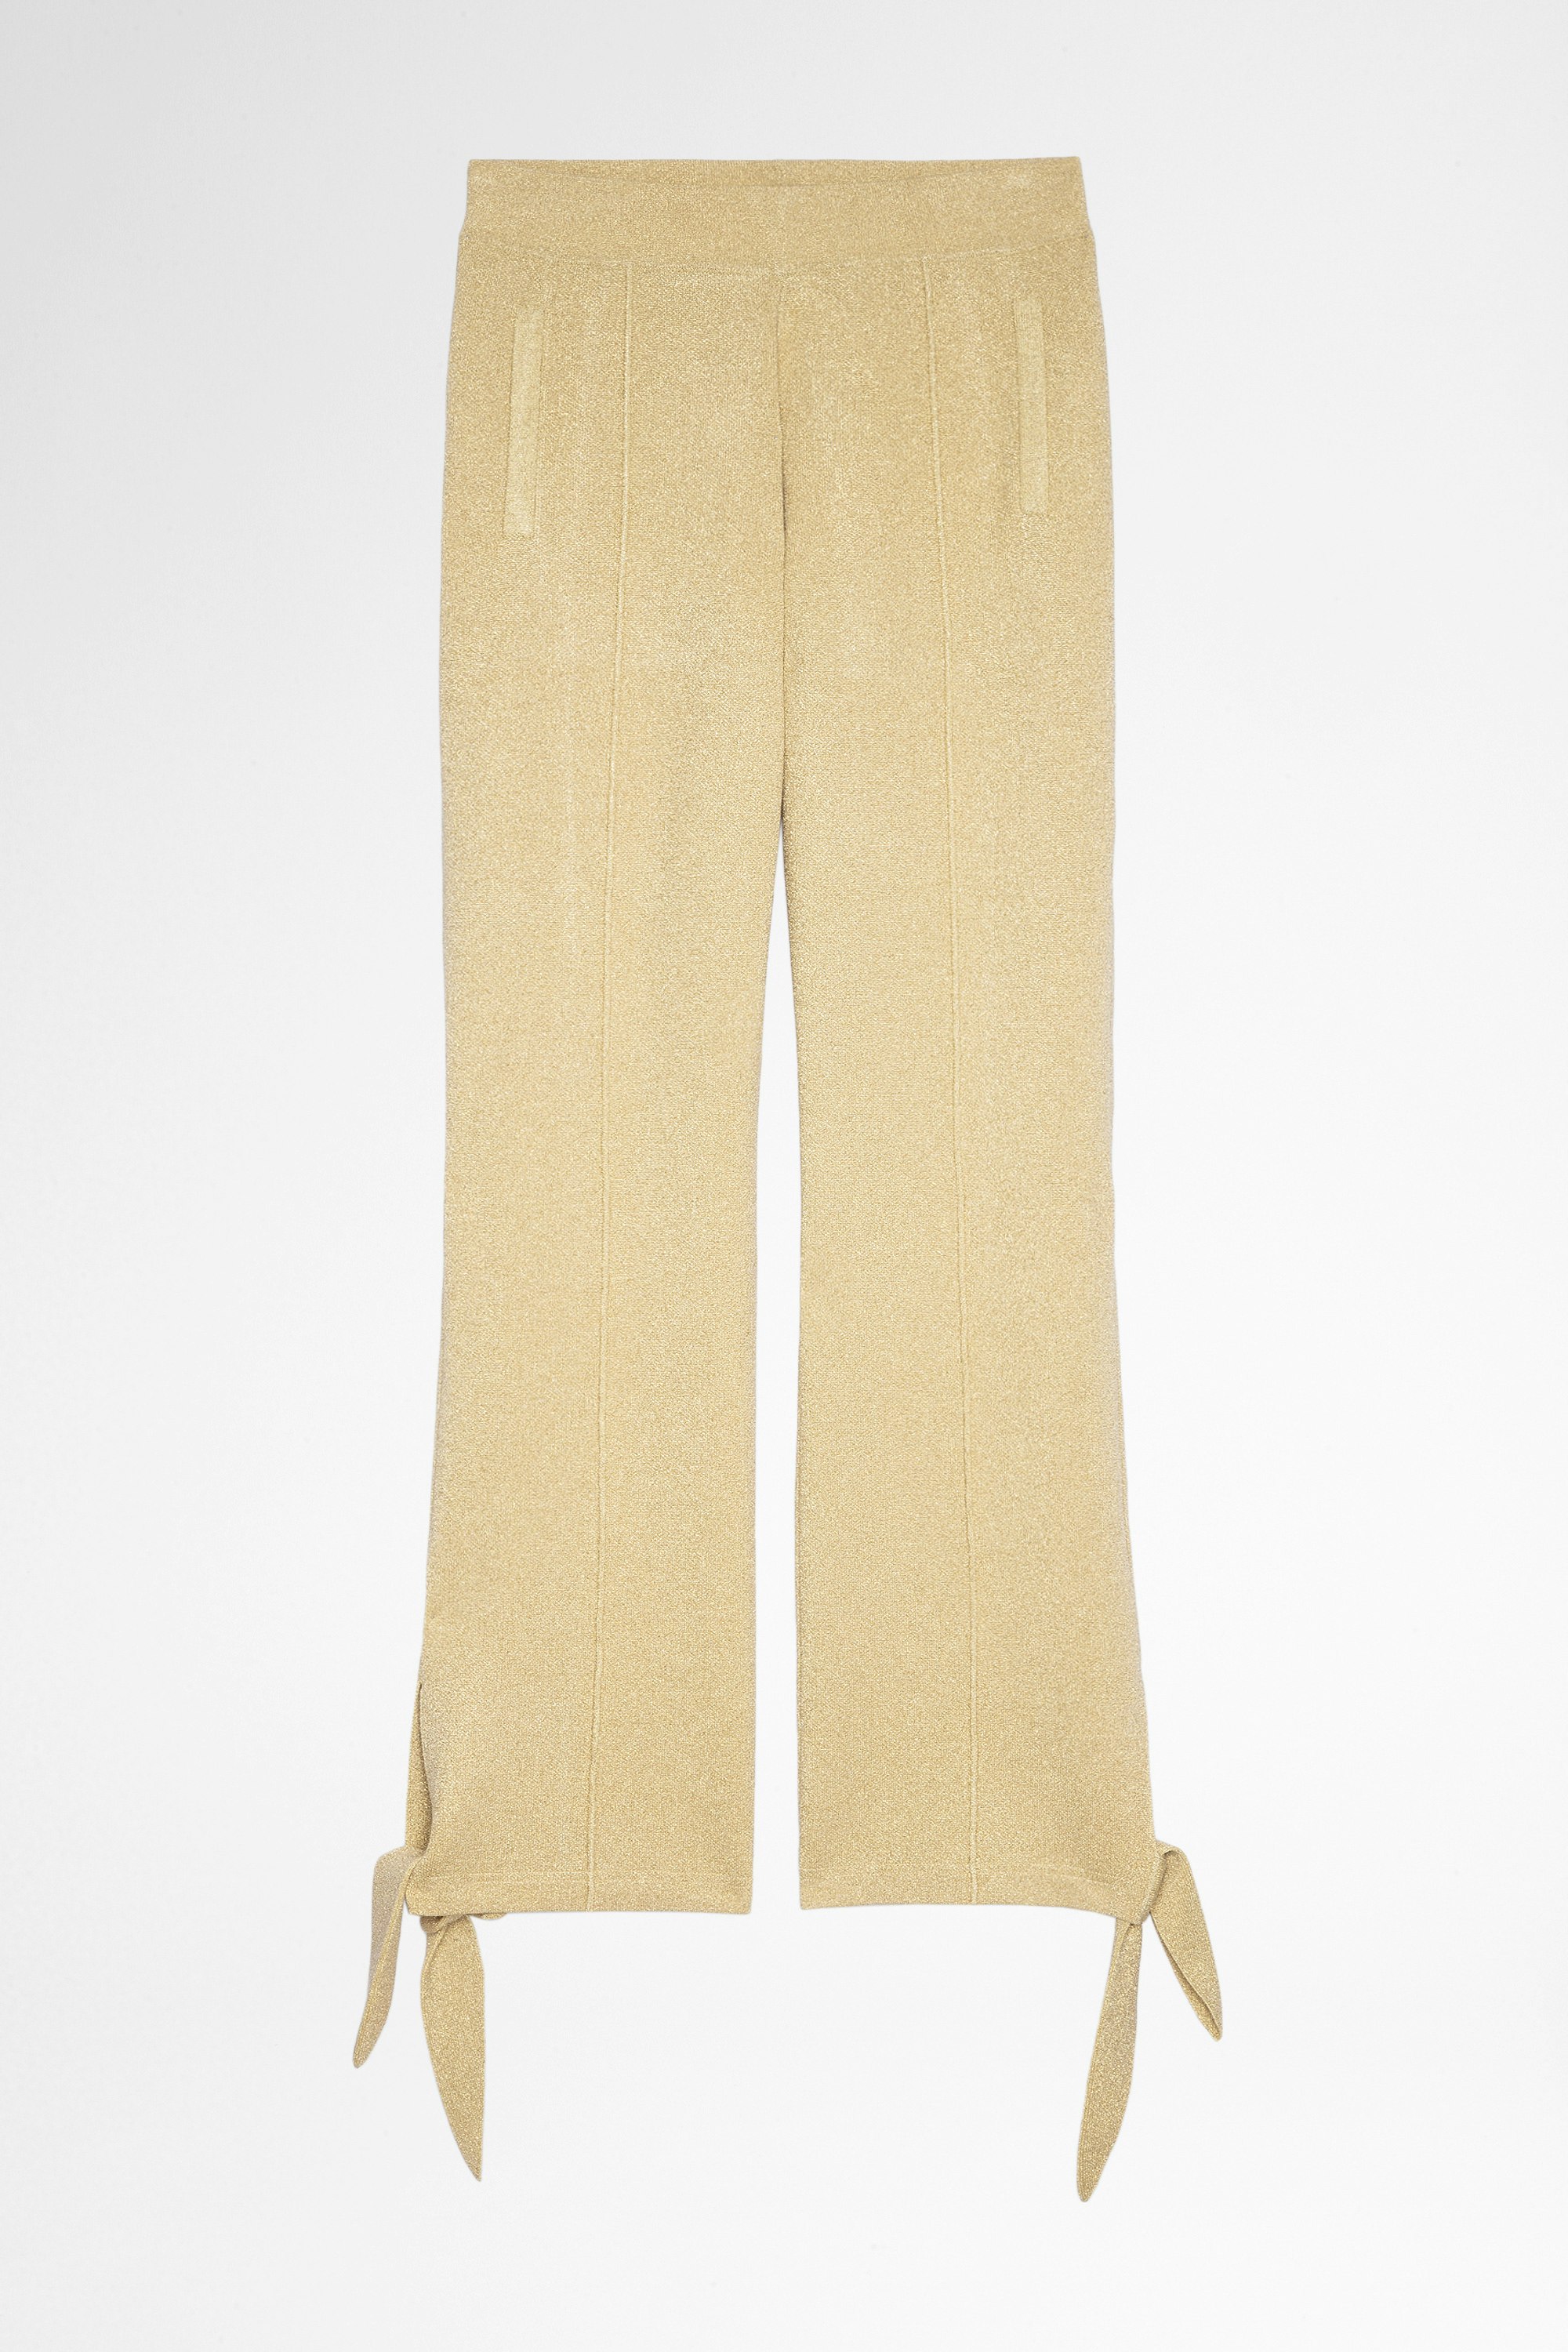 Chill Pants Women's knitted trousers with metallic thread, tied at the bottom of the leg